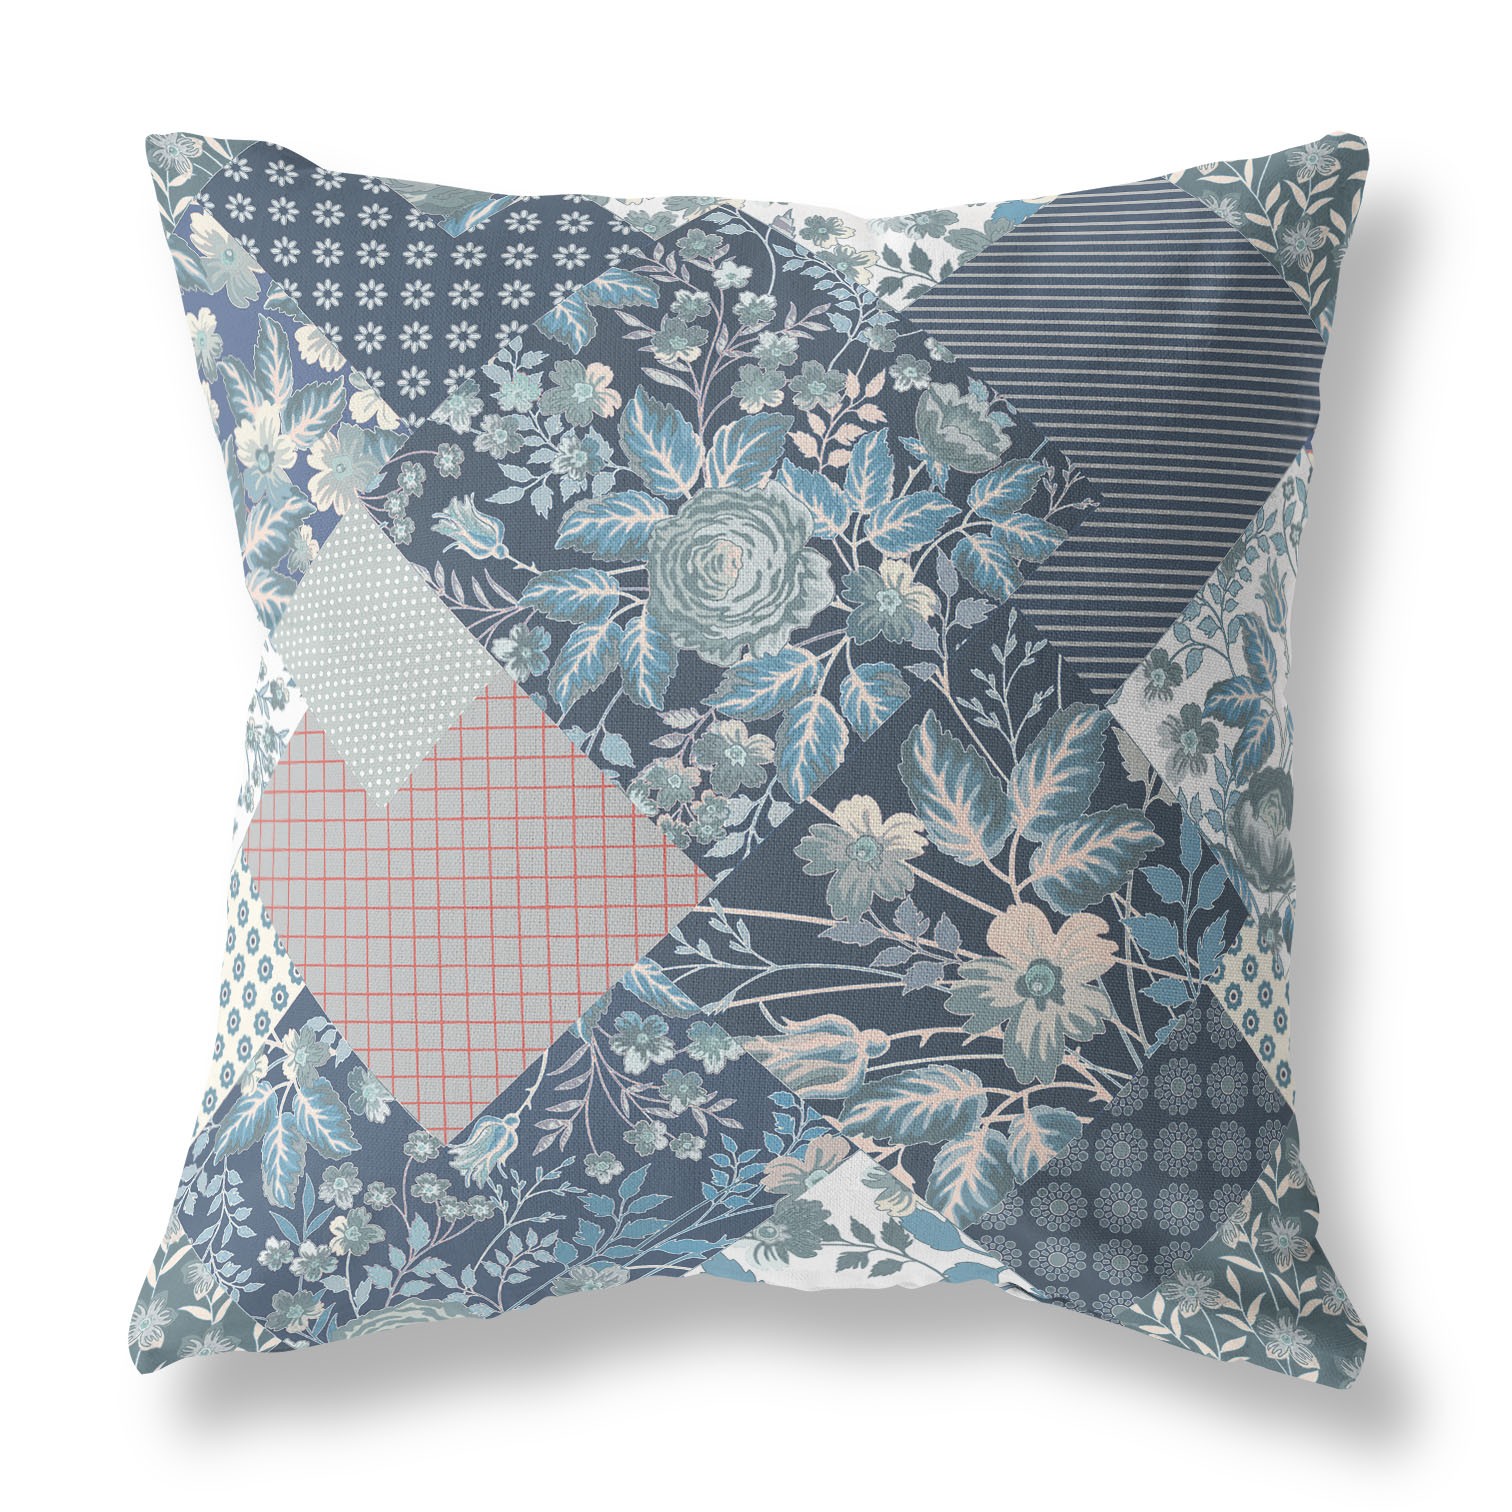 18" Blue White Boho Floral Indoor Outdoor Throw Pillow-413916-1